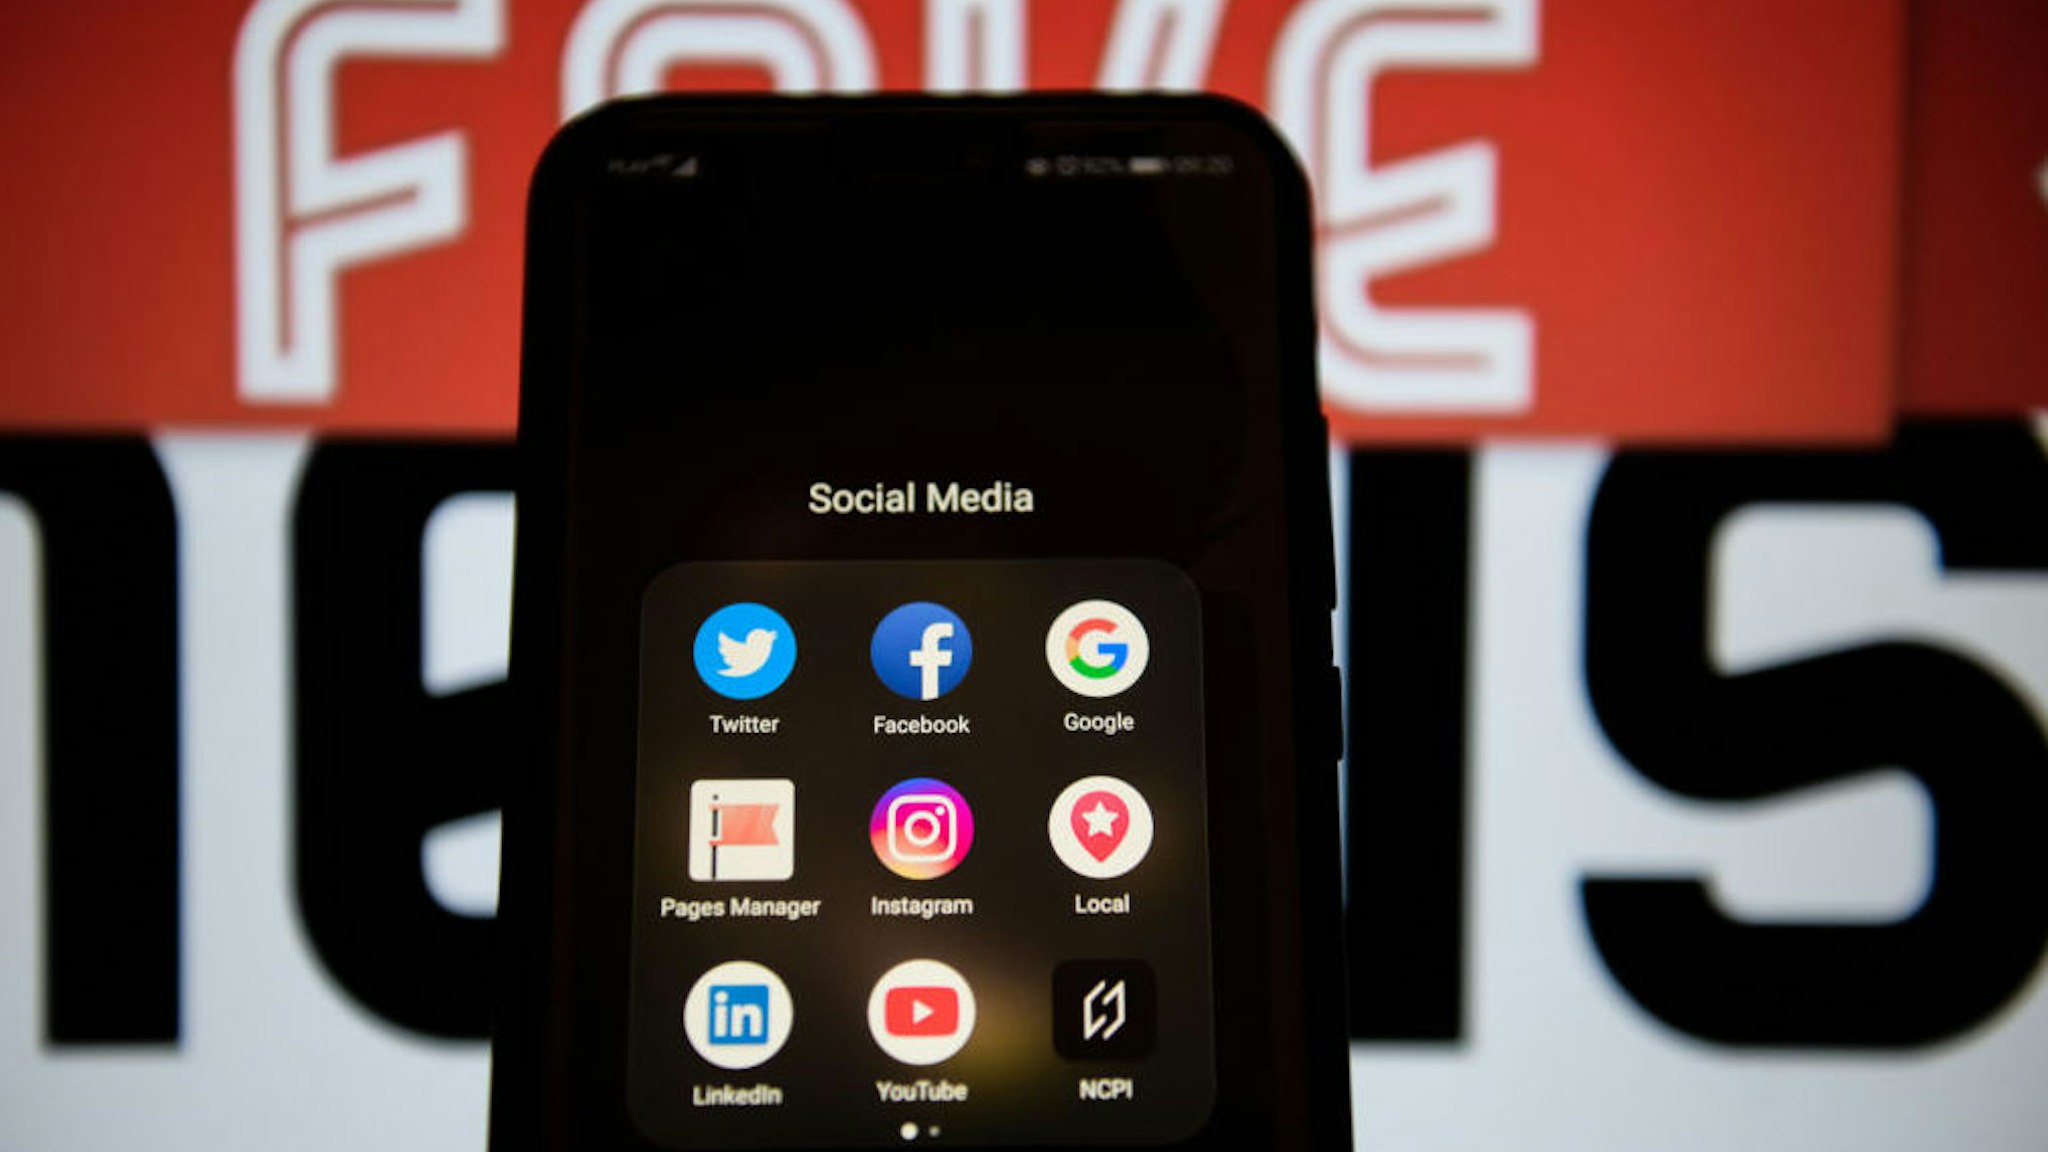 Social Media Apps On An Android Mobile Phone